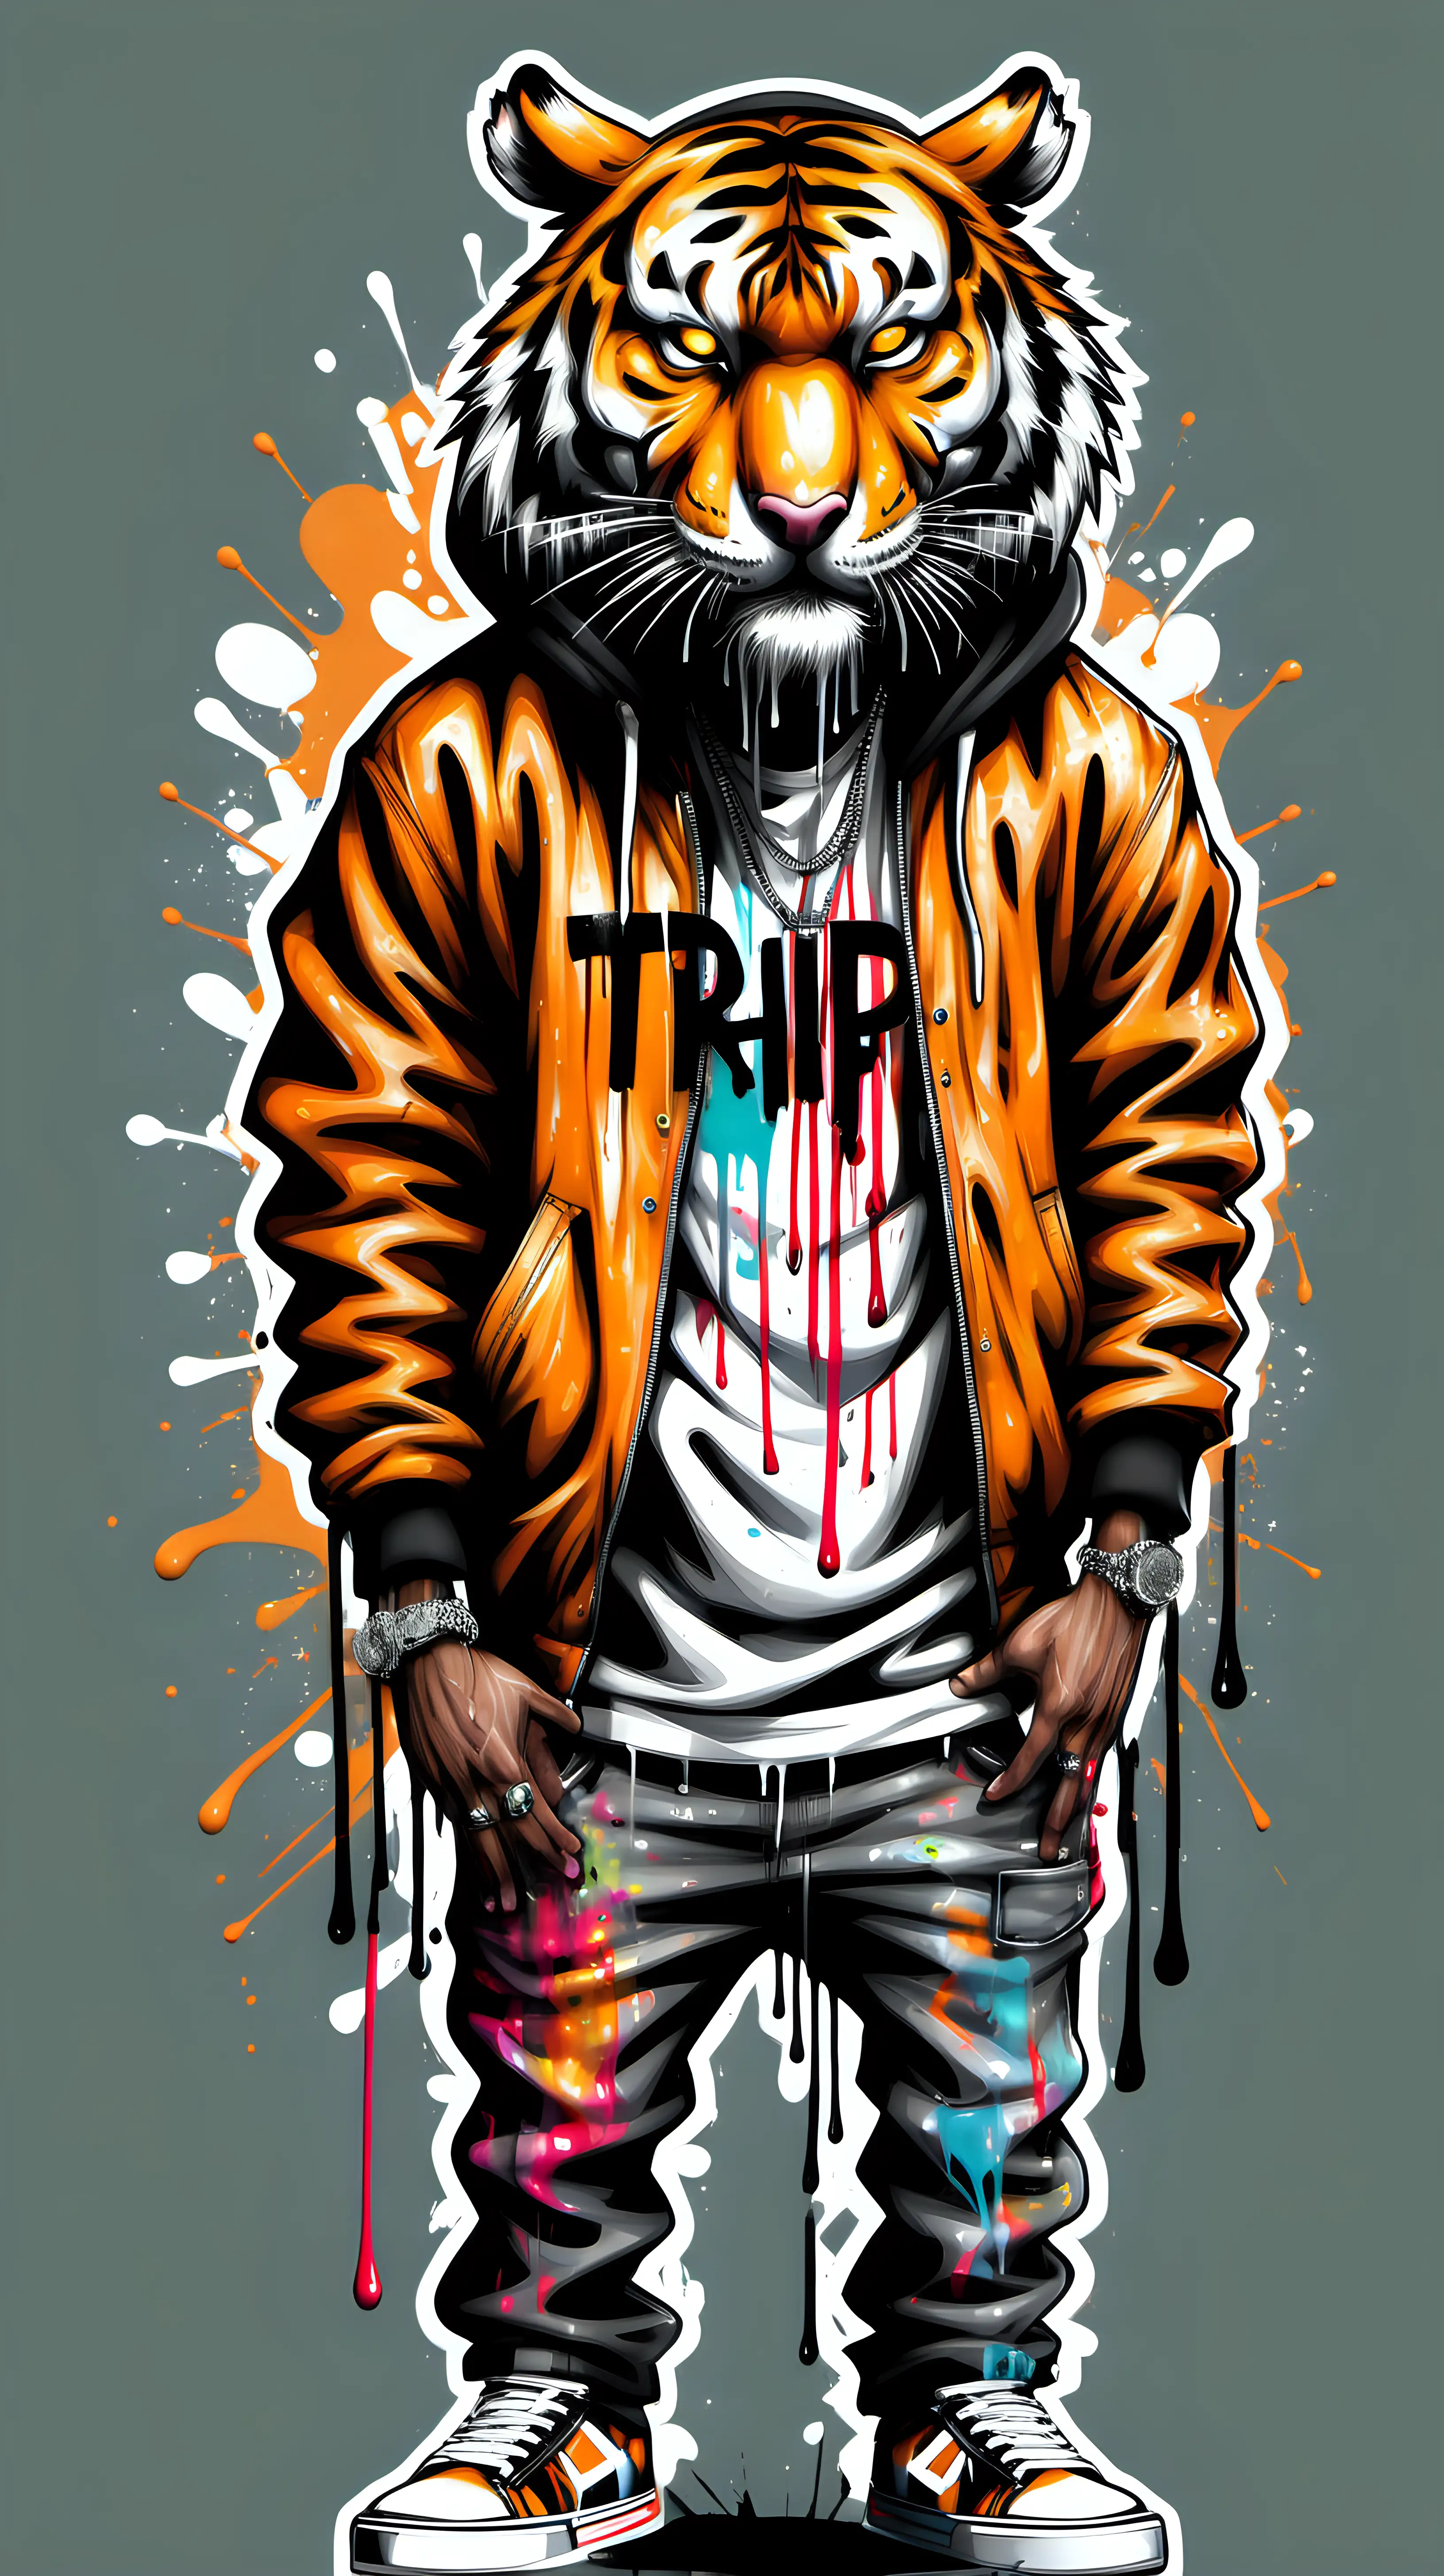 GraffitiStyled Tiger with True HipHop Drip